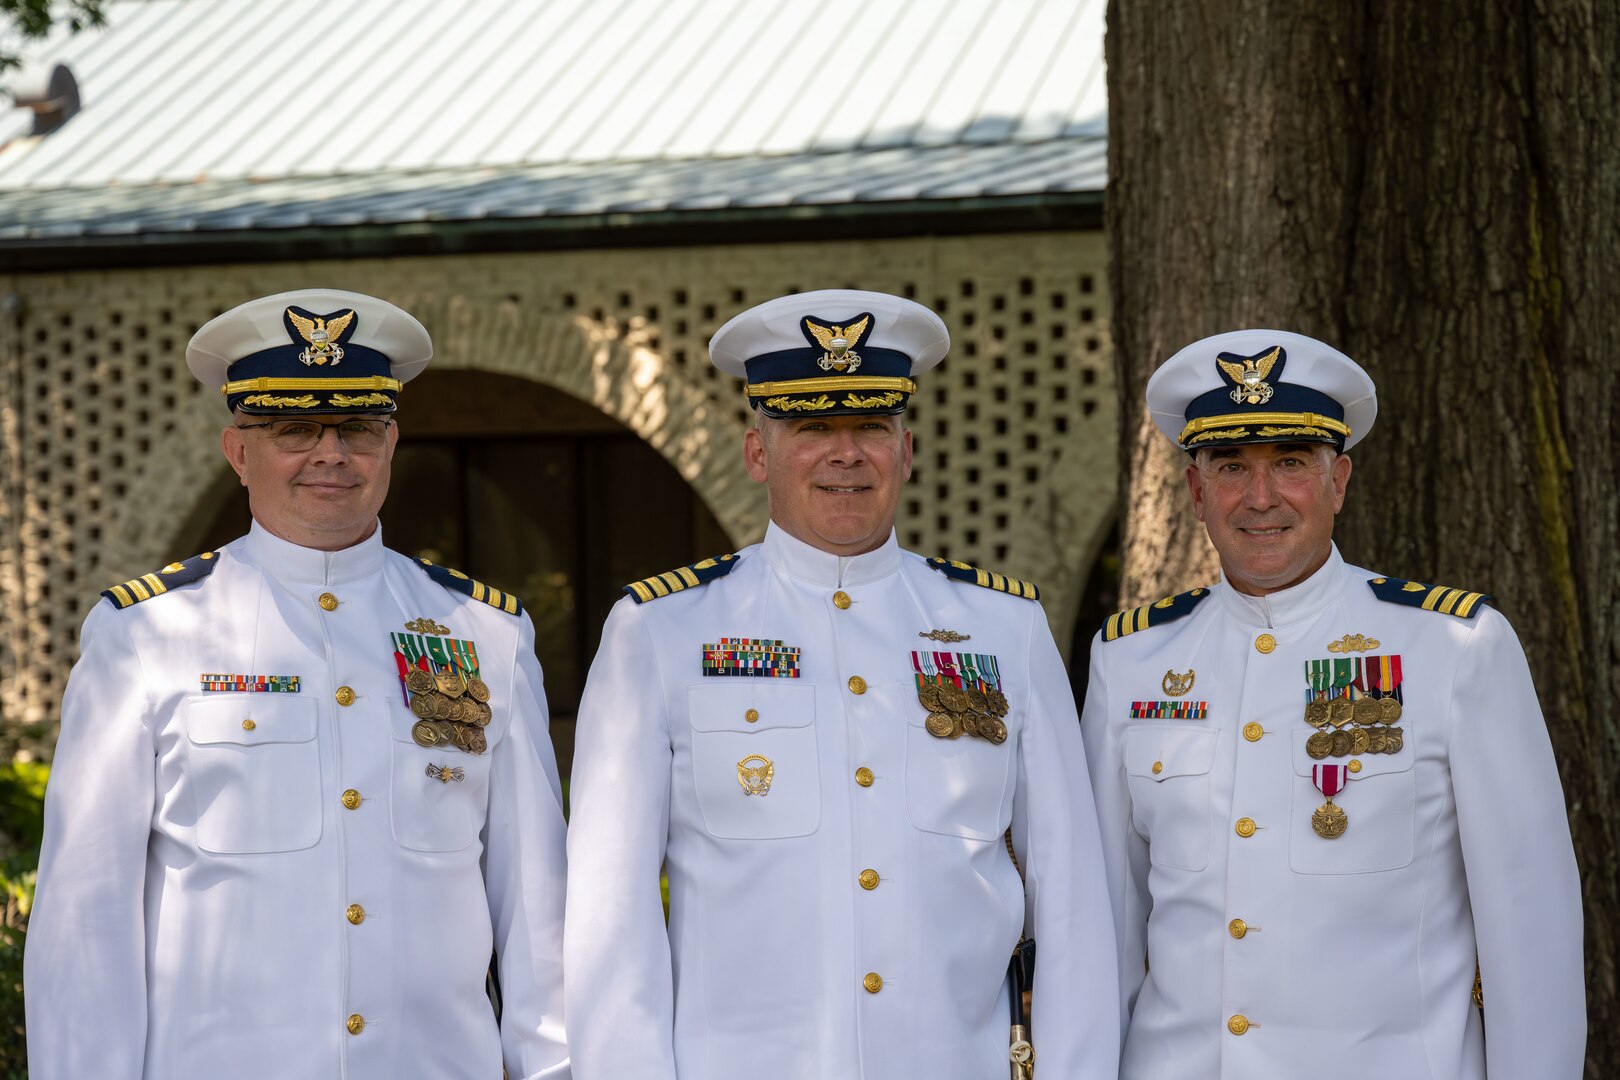 Cmdr. Elkins (left), Capt. Ryan and Cmdr. Lovenstein pose for a photo following Port Security 305’s change of command ceremony in Newport News, Virginia, June 27, 2023. Cmdr. John Elkins has relieved Cmdr. James Lovenstein as the commanding officer of PSU 305, Capt. Jason Ryan, chief of Pacific Area operations, presided over the ceremony. U.S. Coast Guard courtesy photo.